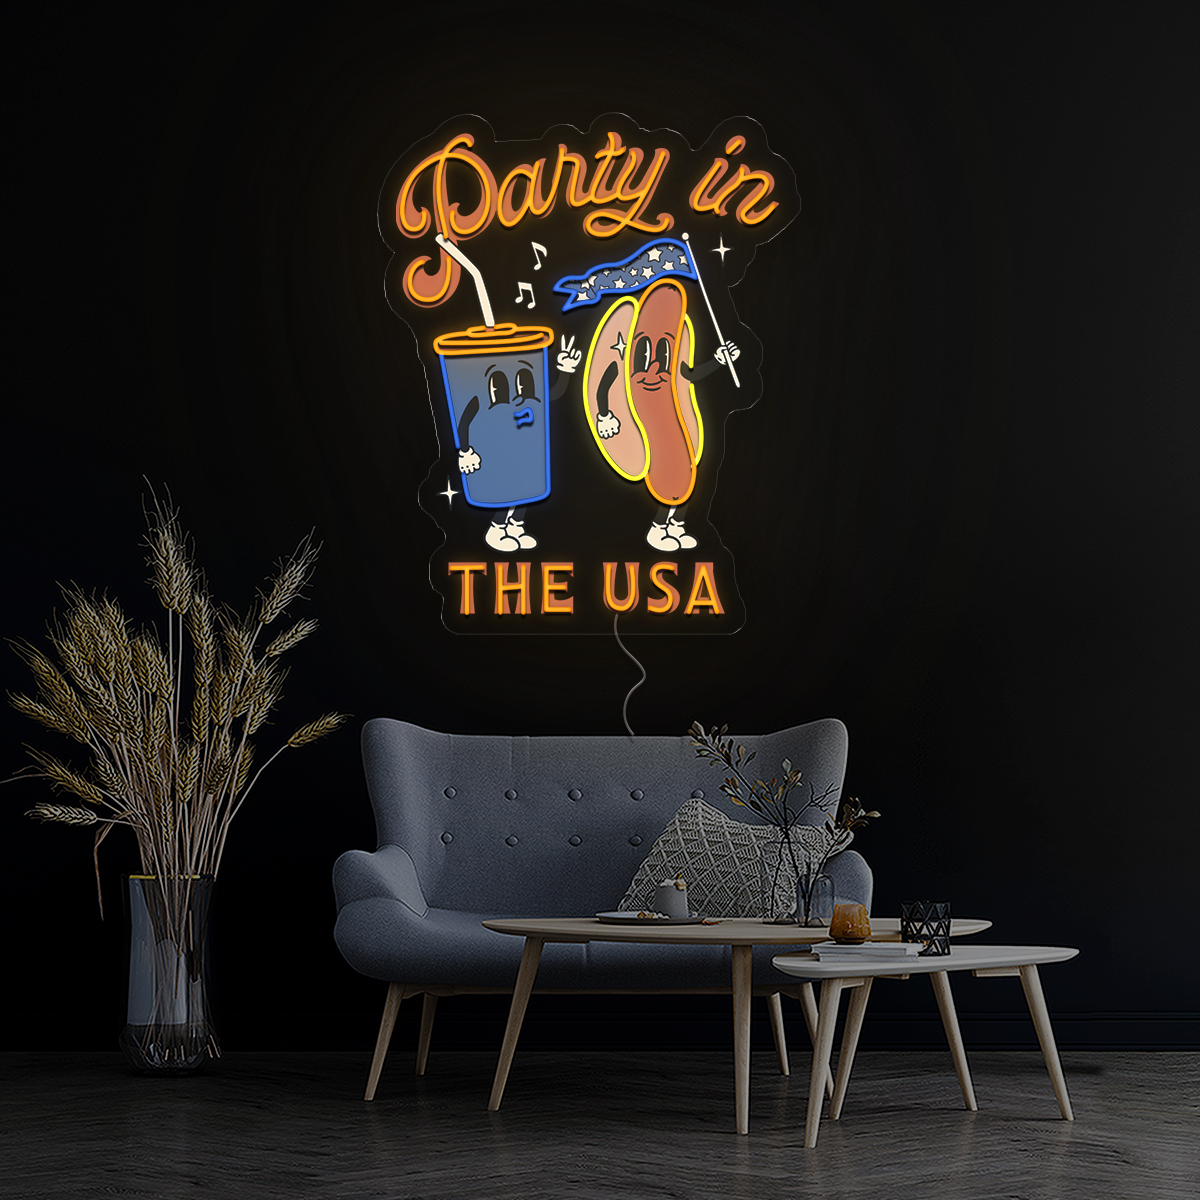 4th of July Party In The USA Artwork Neon Sign